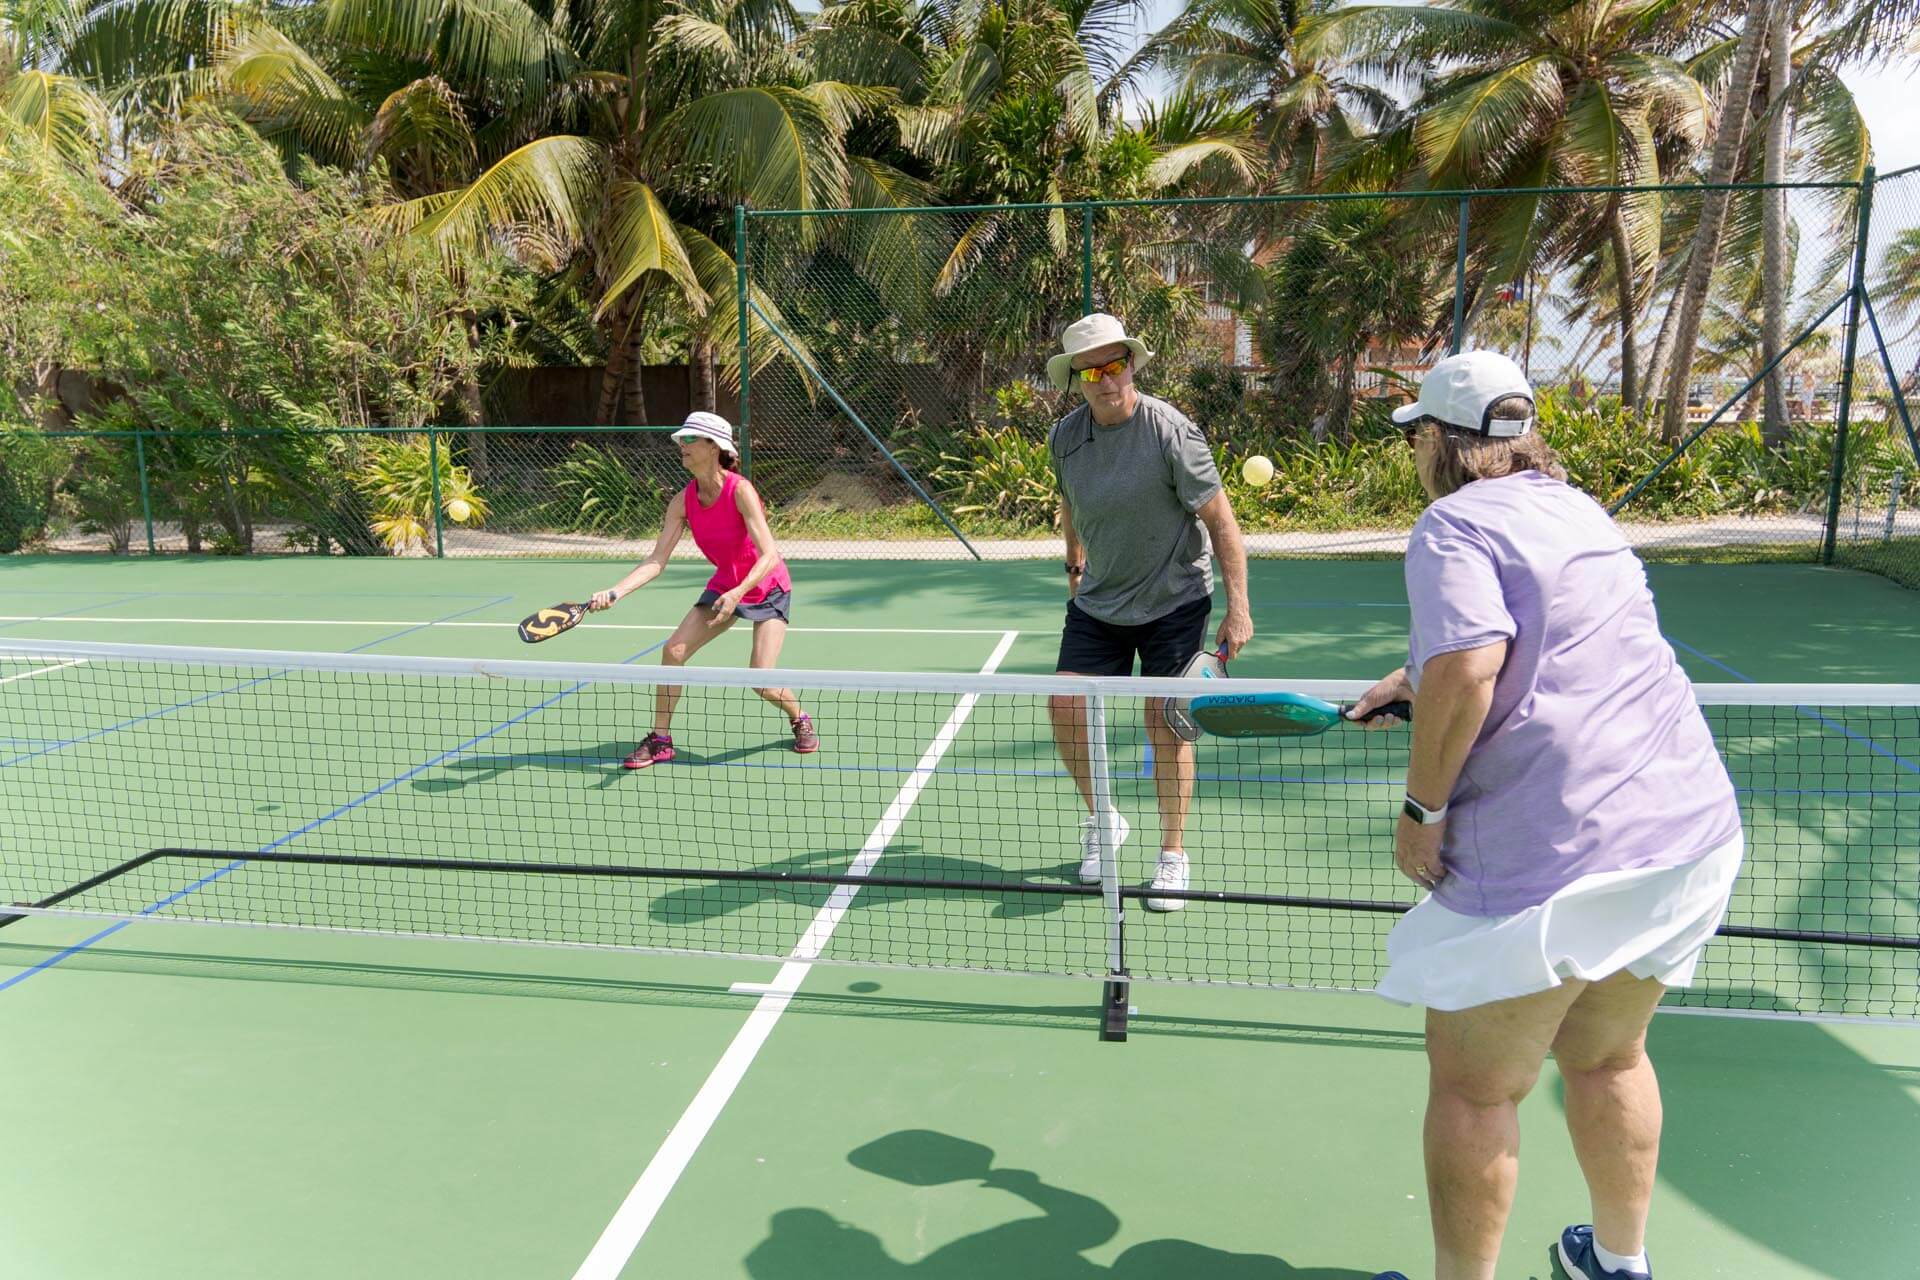 5 Major Differences Between Tennis and Pickleball: The Growing Popularity of Pickleball in the United States